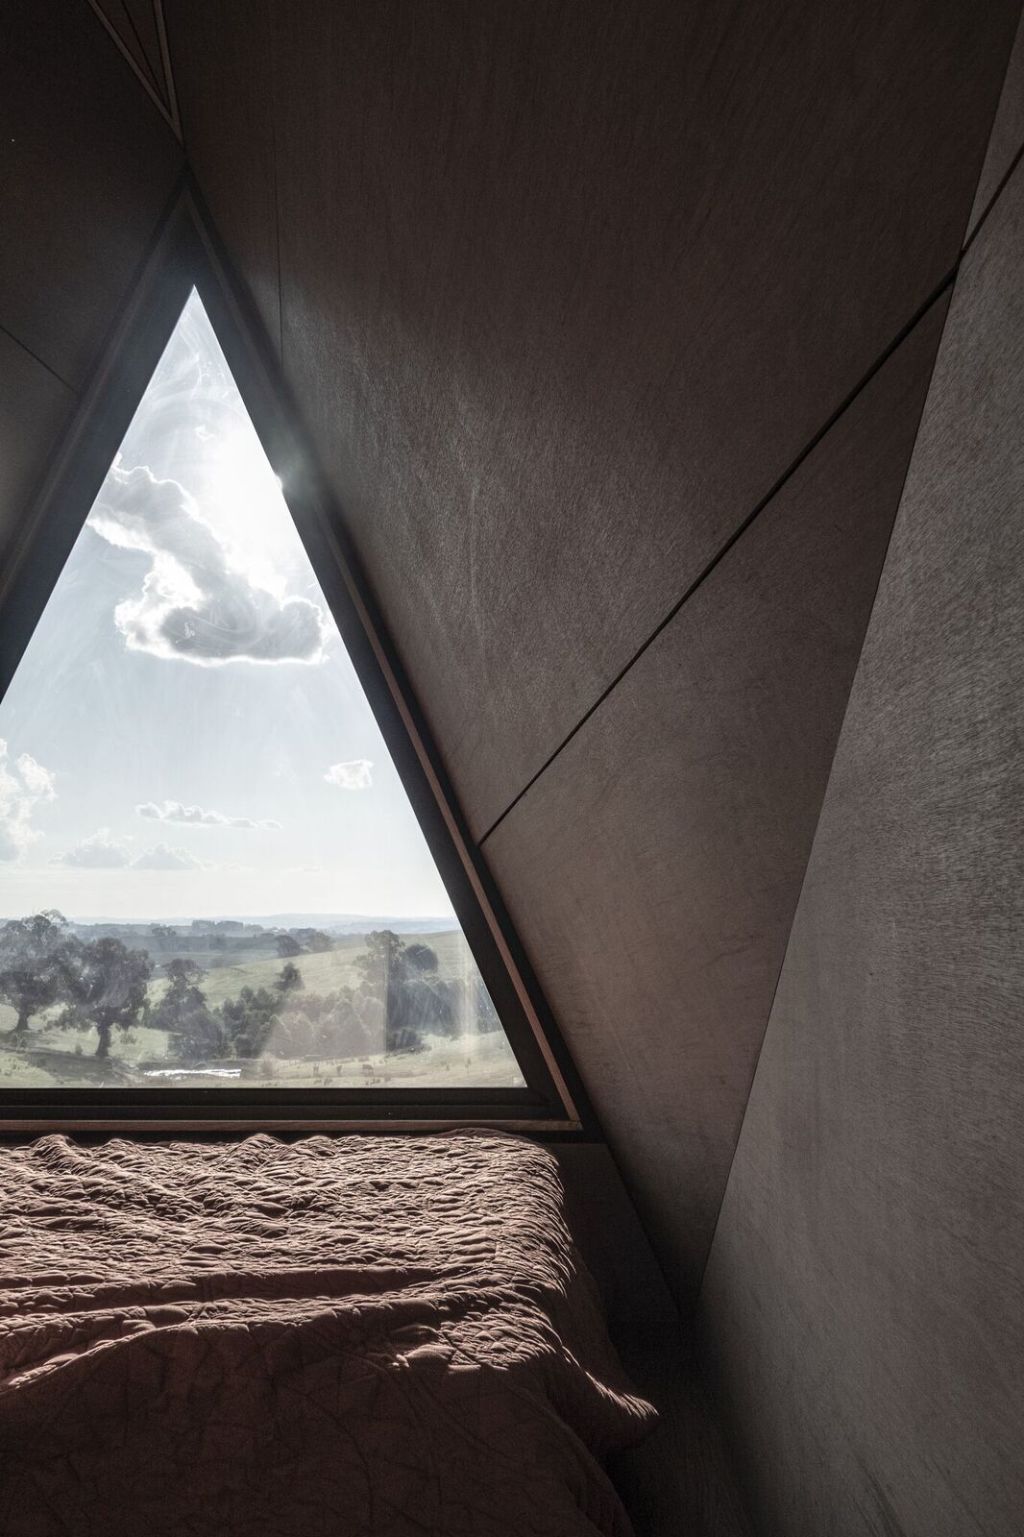 The triangular window at one end allows for ample natural light to filter through. Photo: Ben Edwards